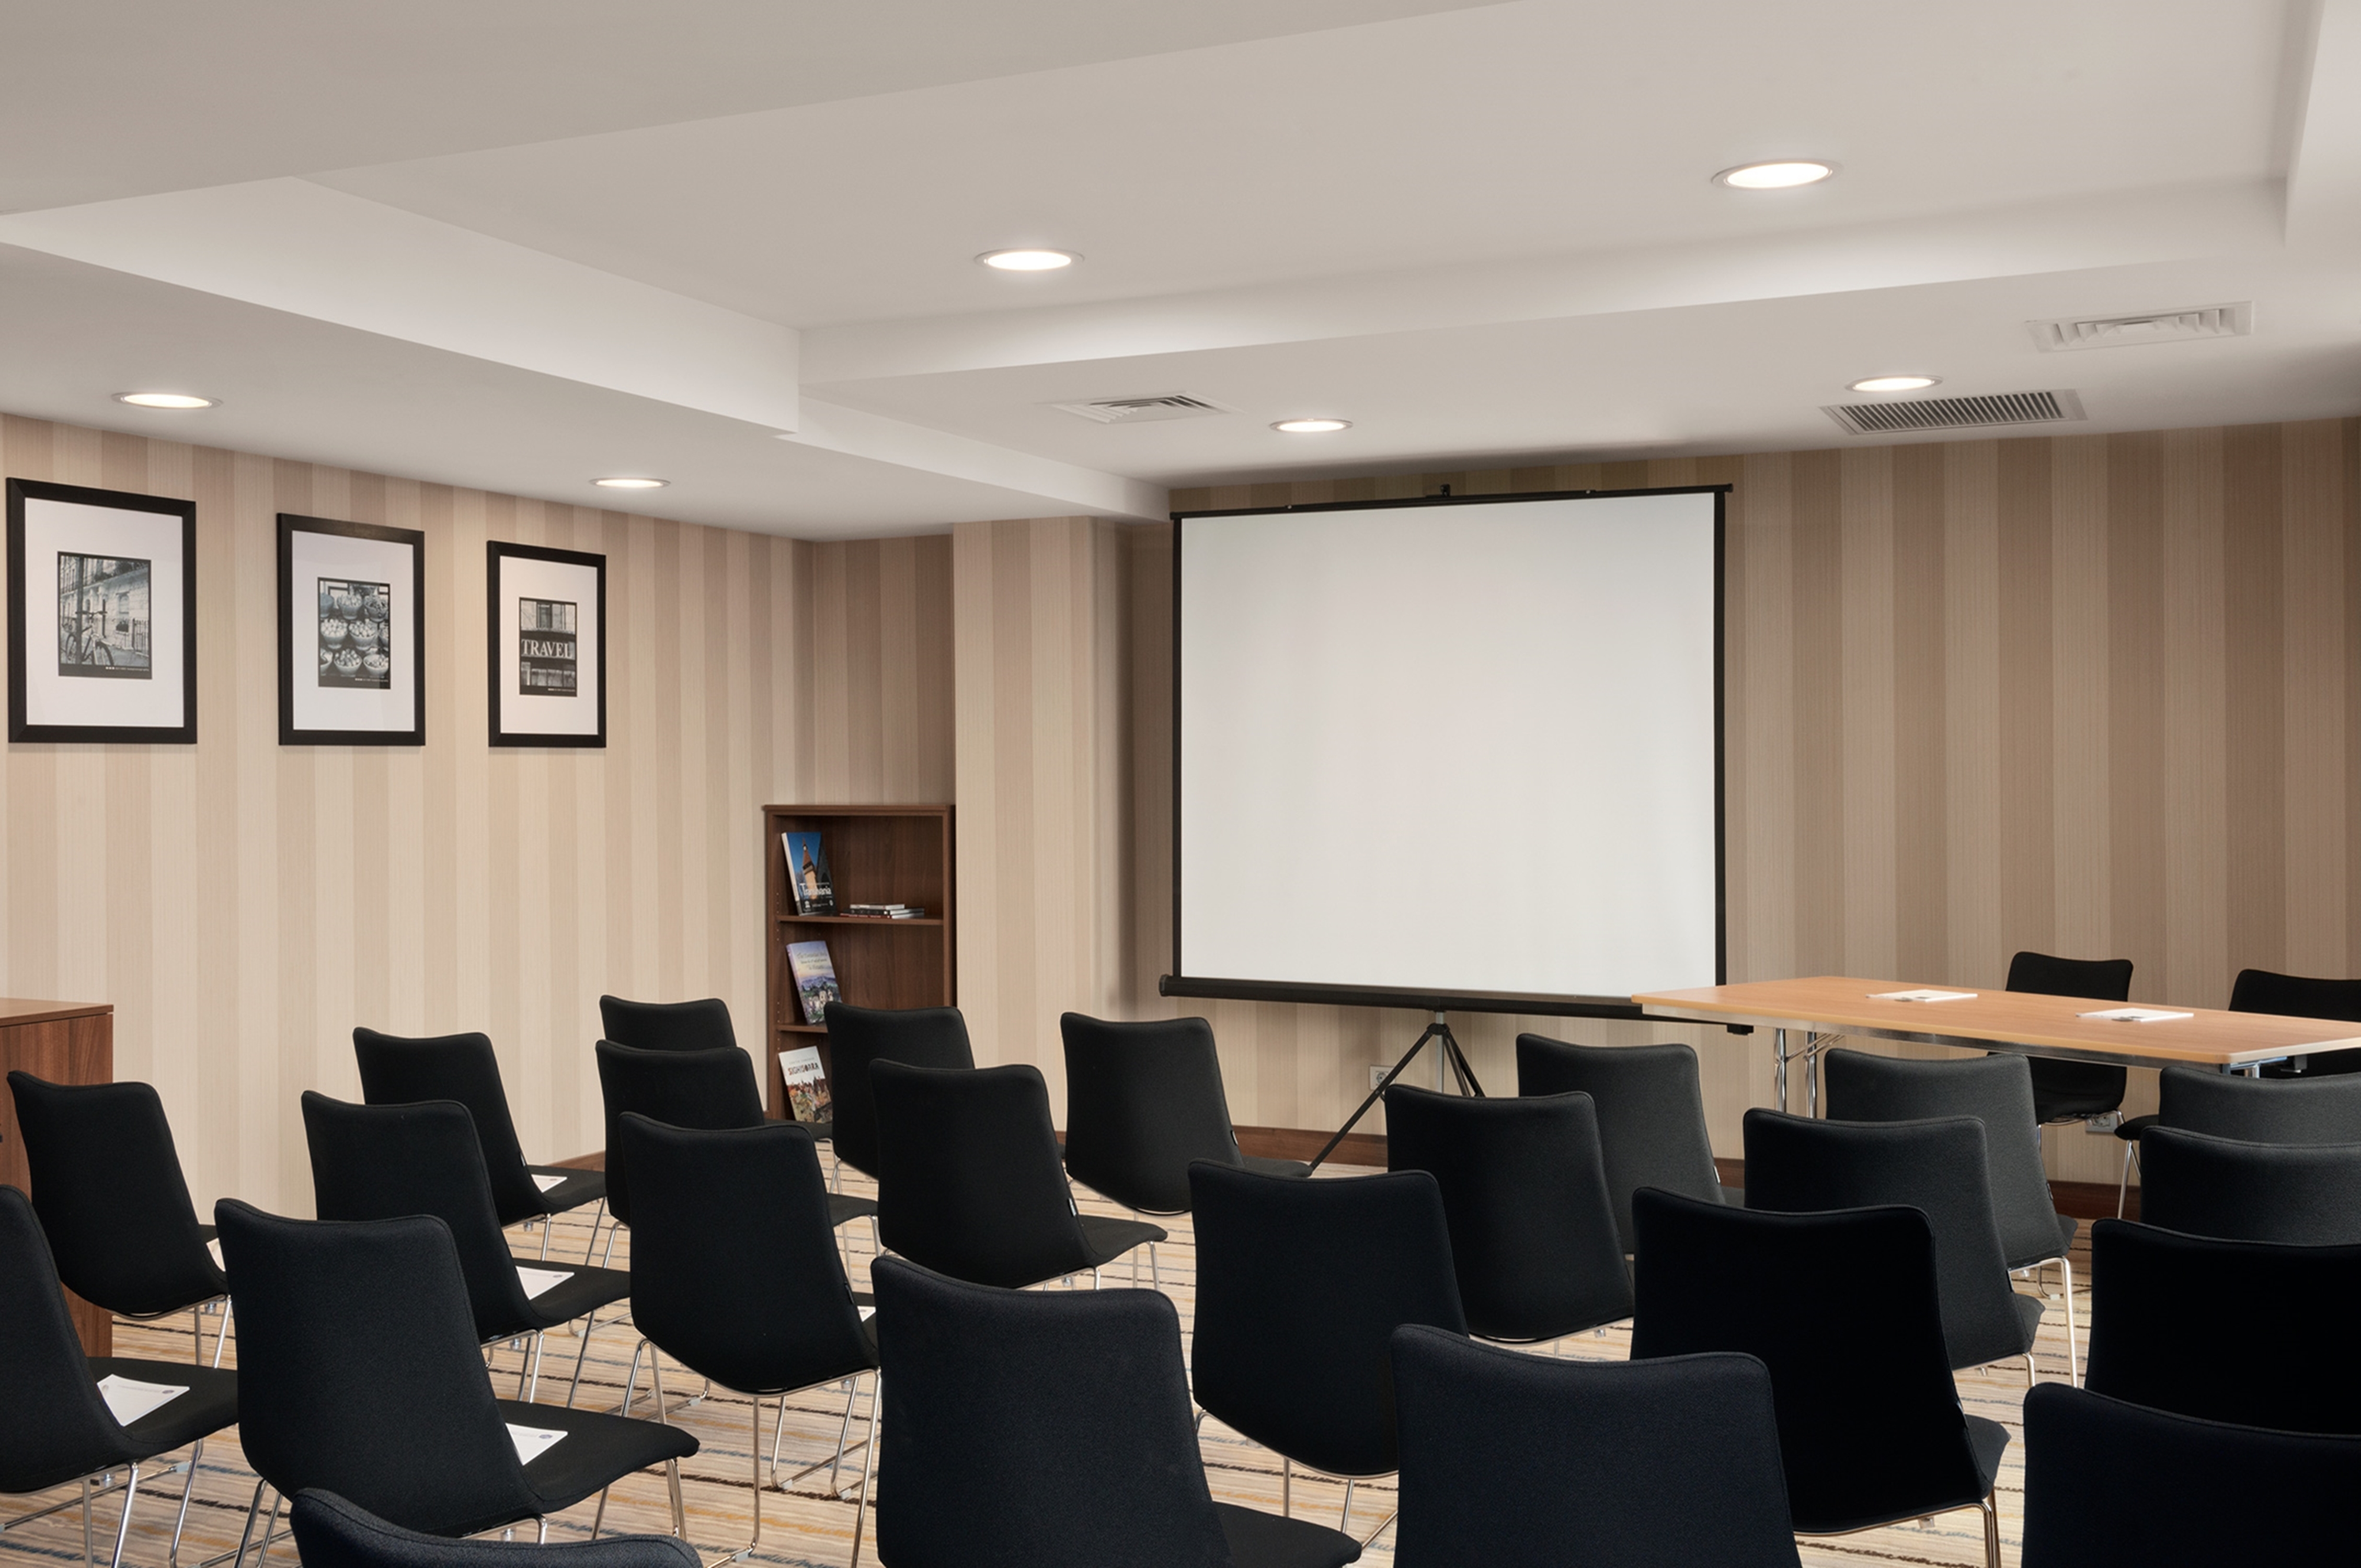 Meeting Room Setup Theater Style and a Projection Screen